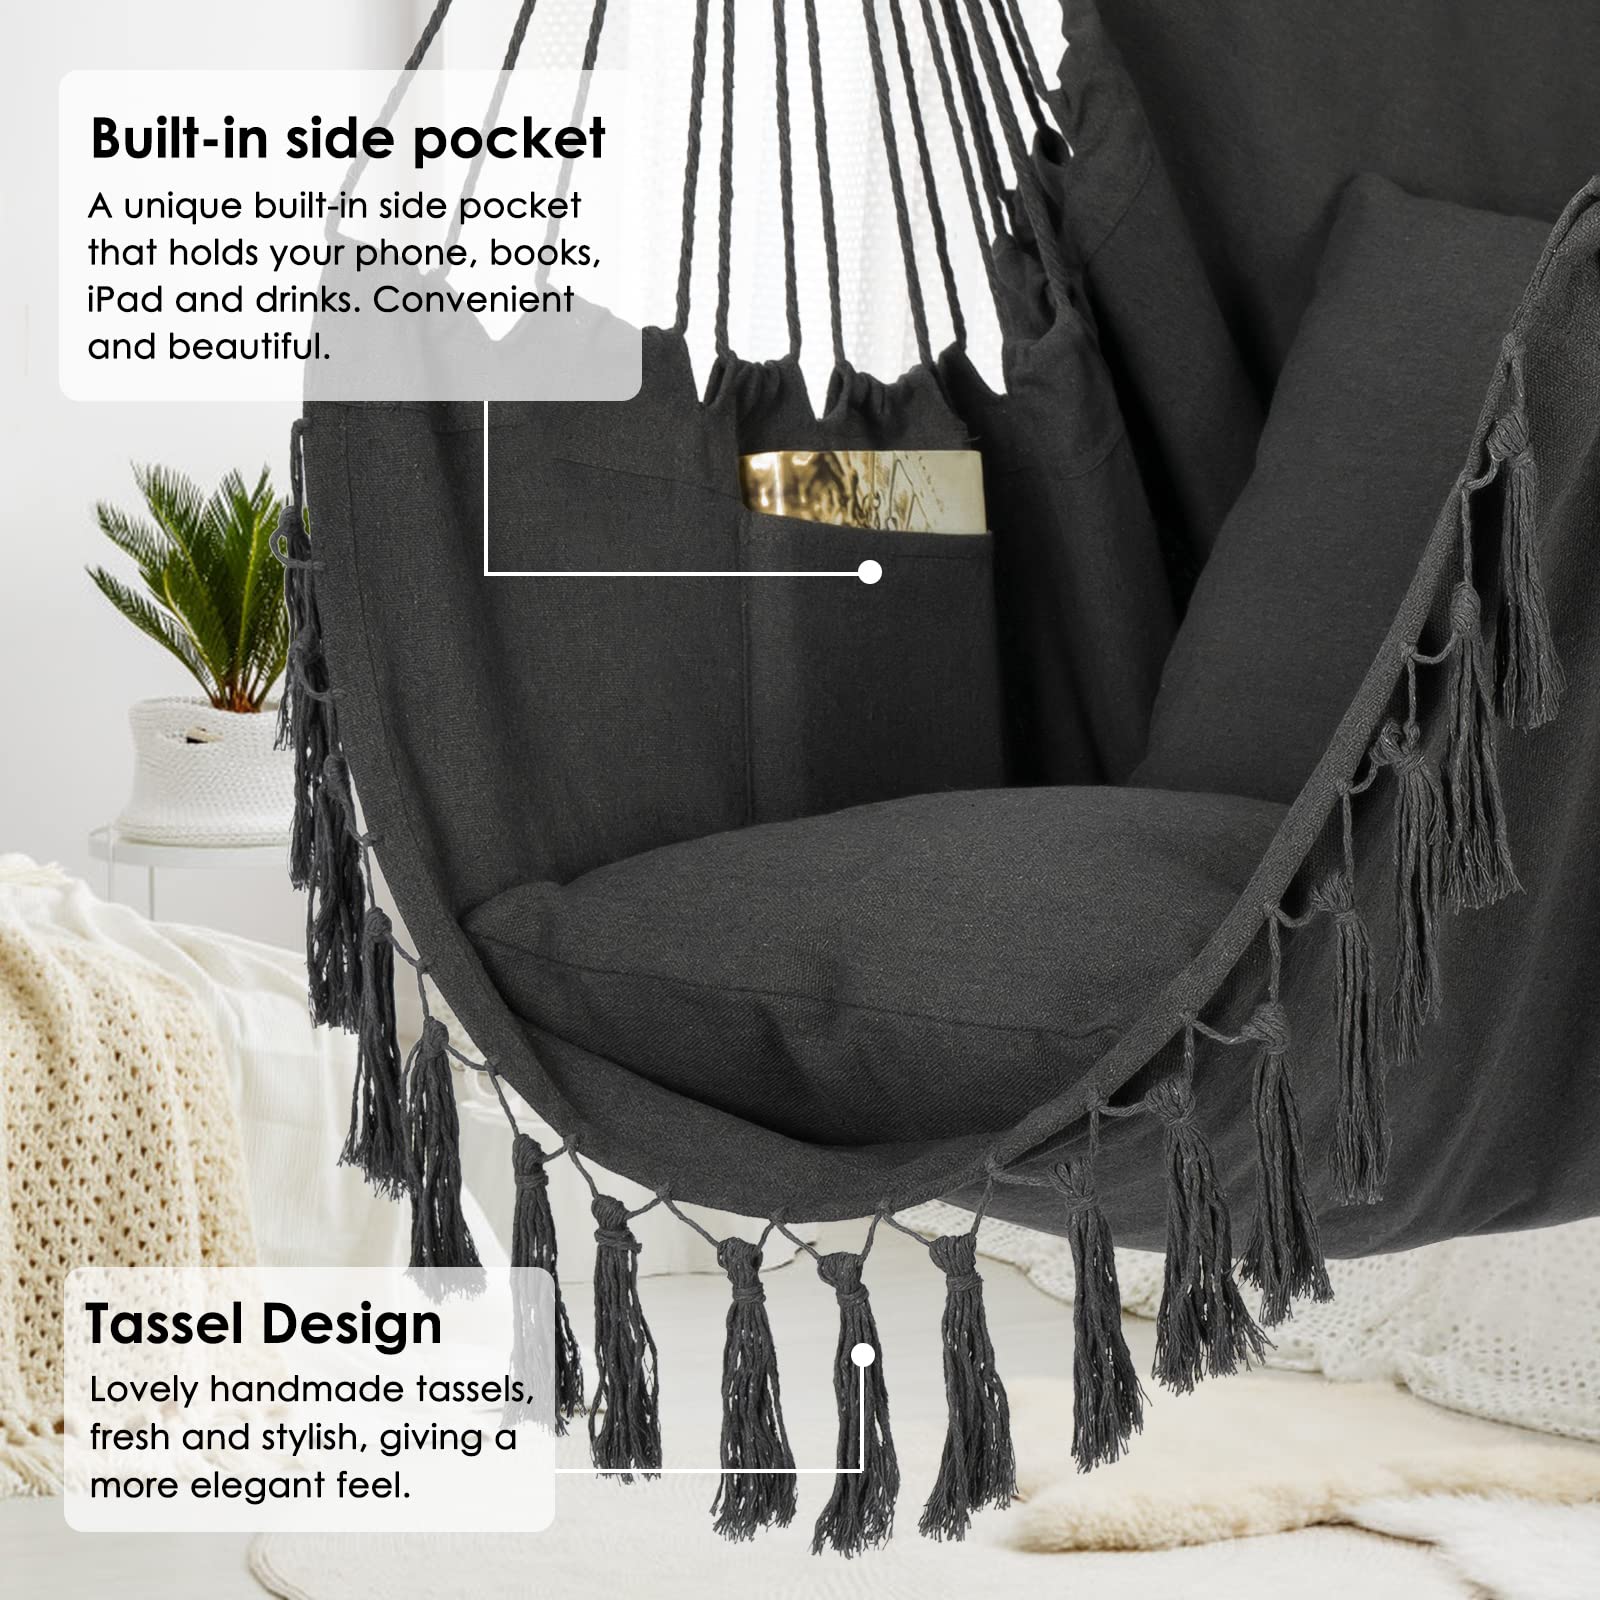 Y- STOP Hammock Chair Hanging Rope Swing, Max 500 Lbs, 2 Cushions Included, Large Macrame Hanging Chair with Pocket, Cotton Weave for Superior Comfort, Durability (Dark Grey)